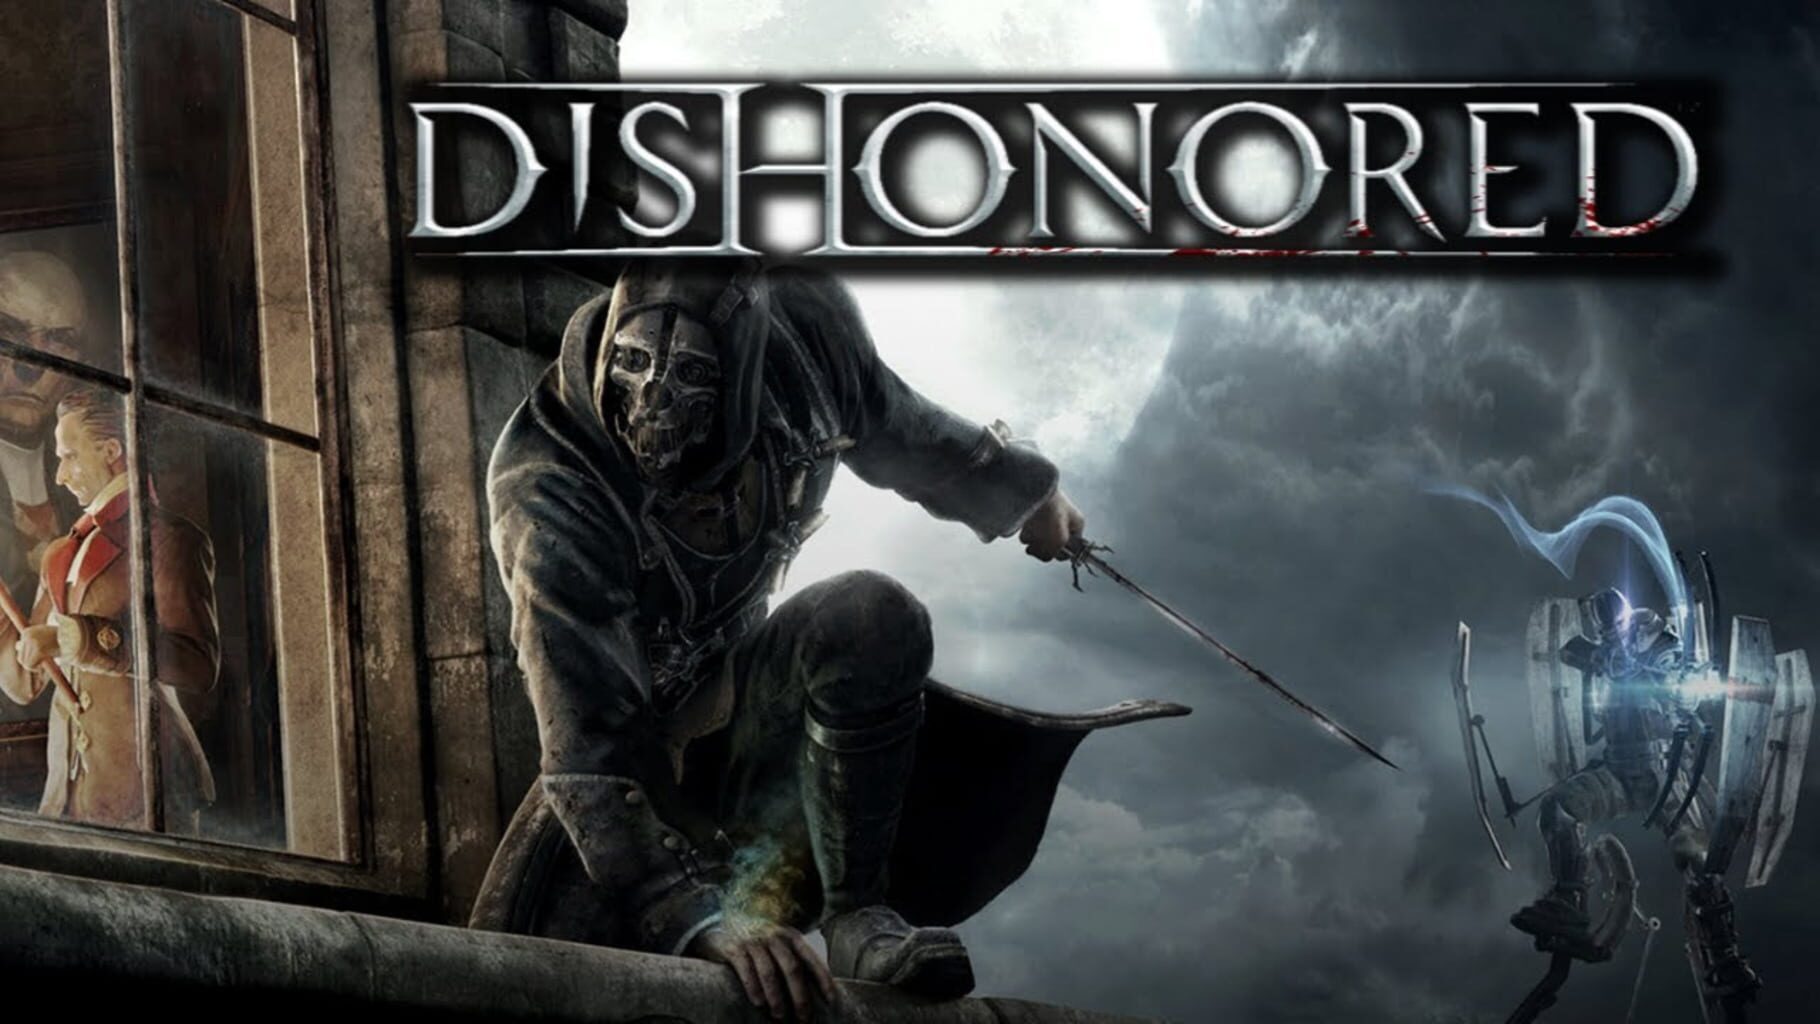 Dishonored: Complete Collection Image